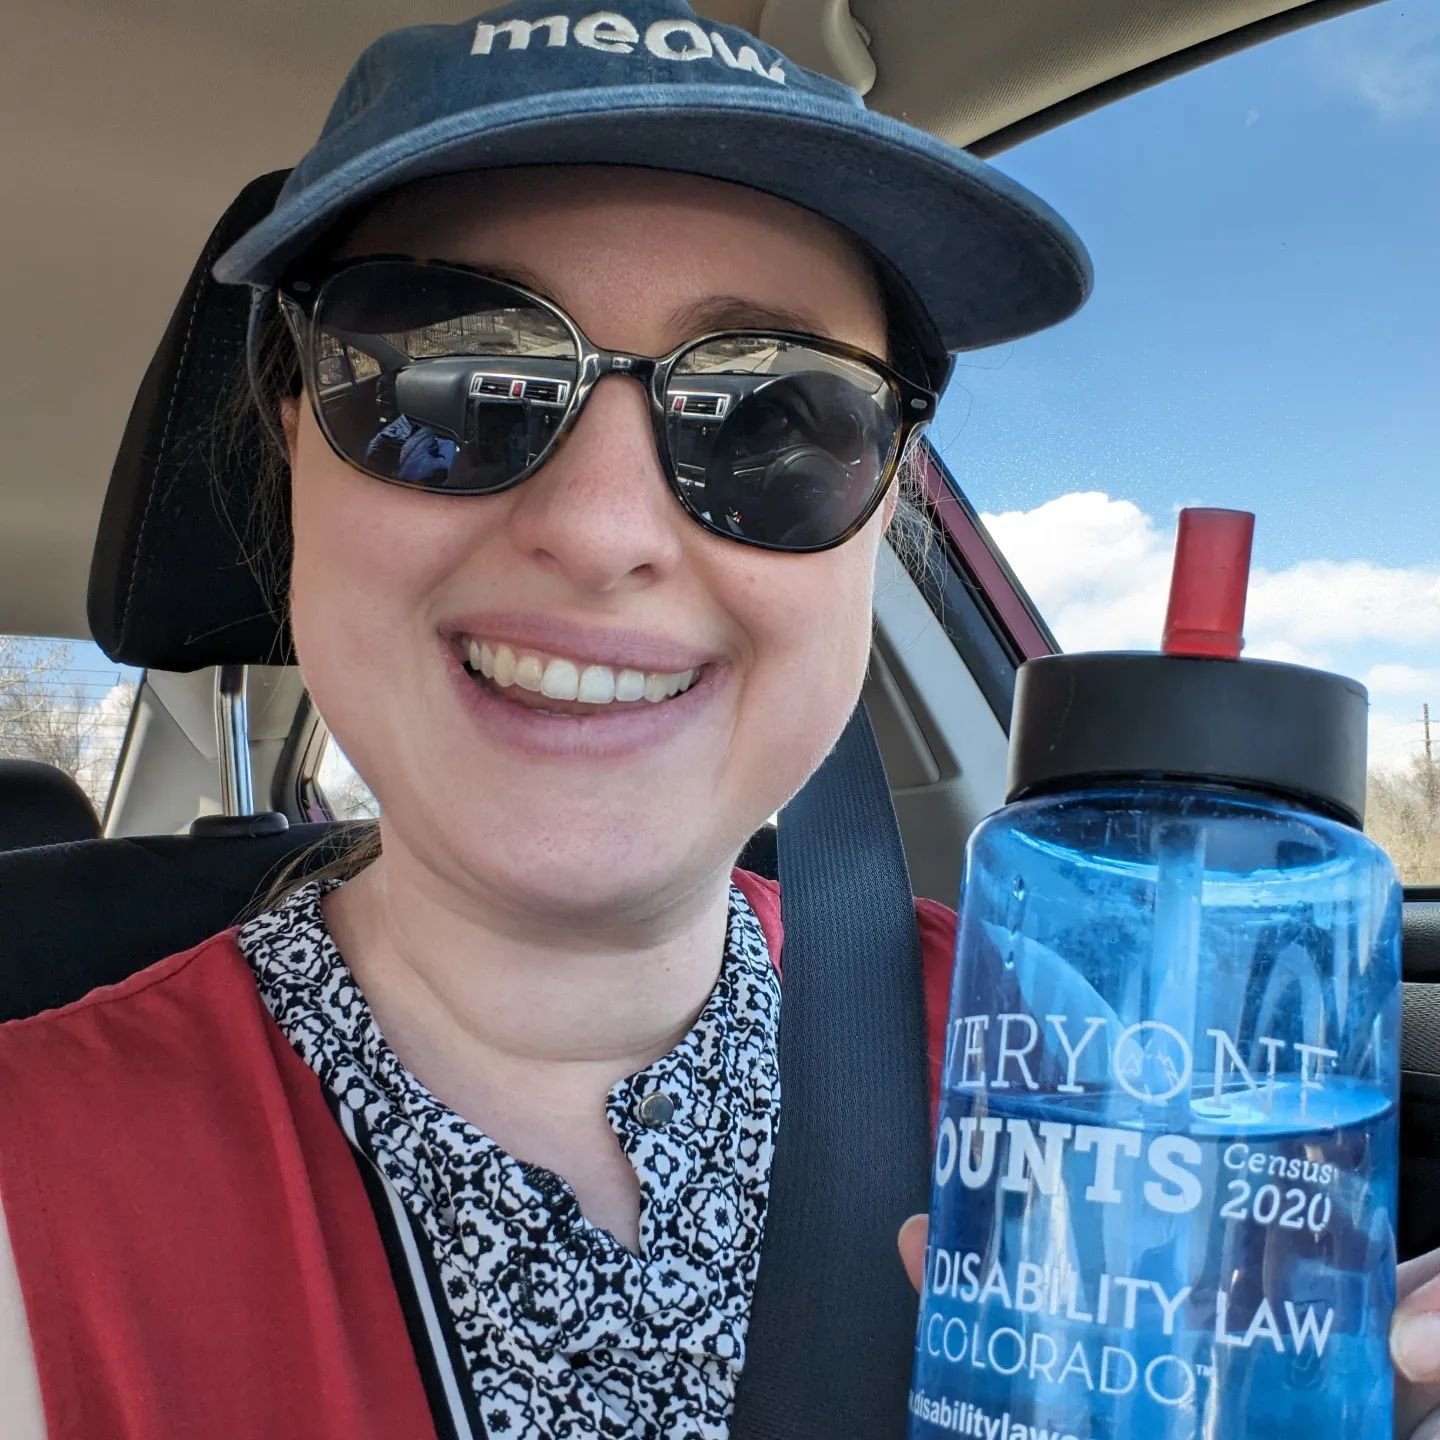 The final prompt is to share your emotional support water bottle! I have lost or broken many of my favorite water bottles (with cats on them), but I do love this one I got at a resource fair. The straw helps for easy access to remember to stay hydrat